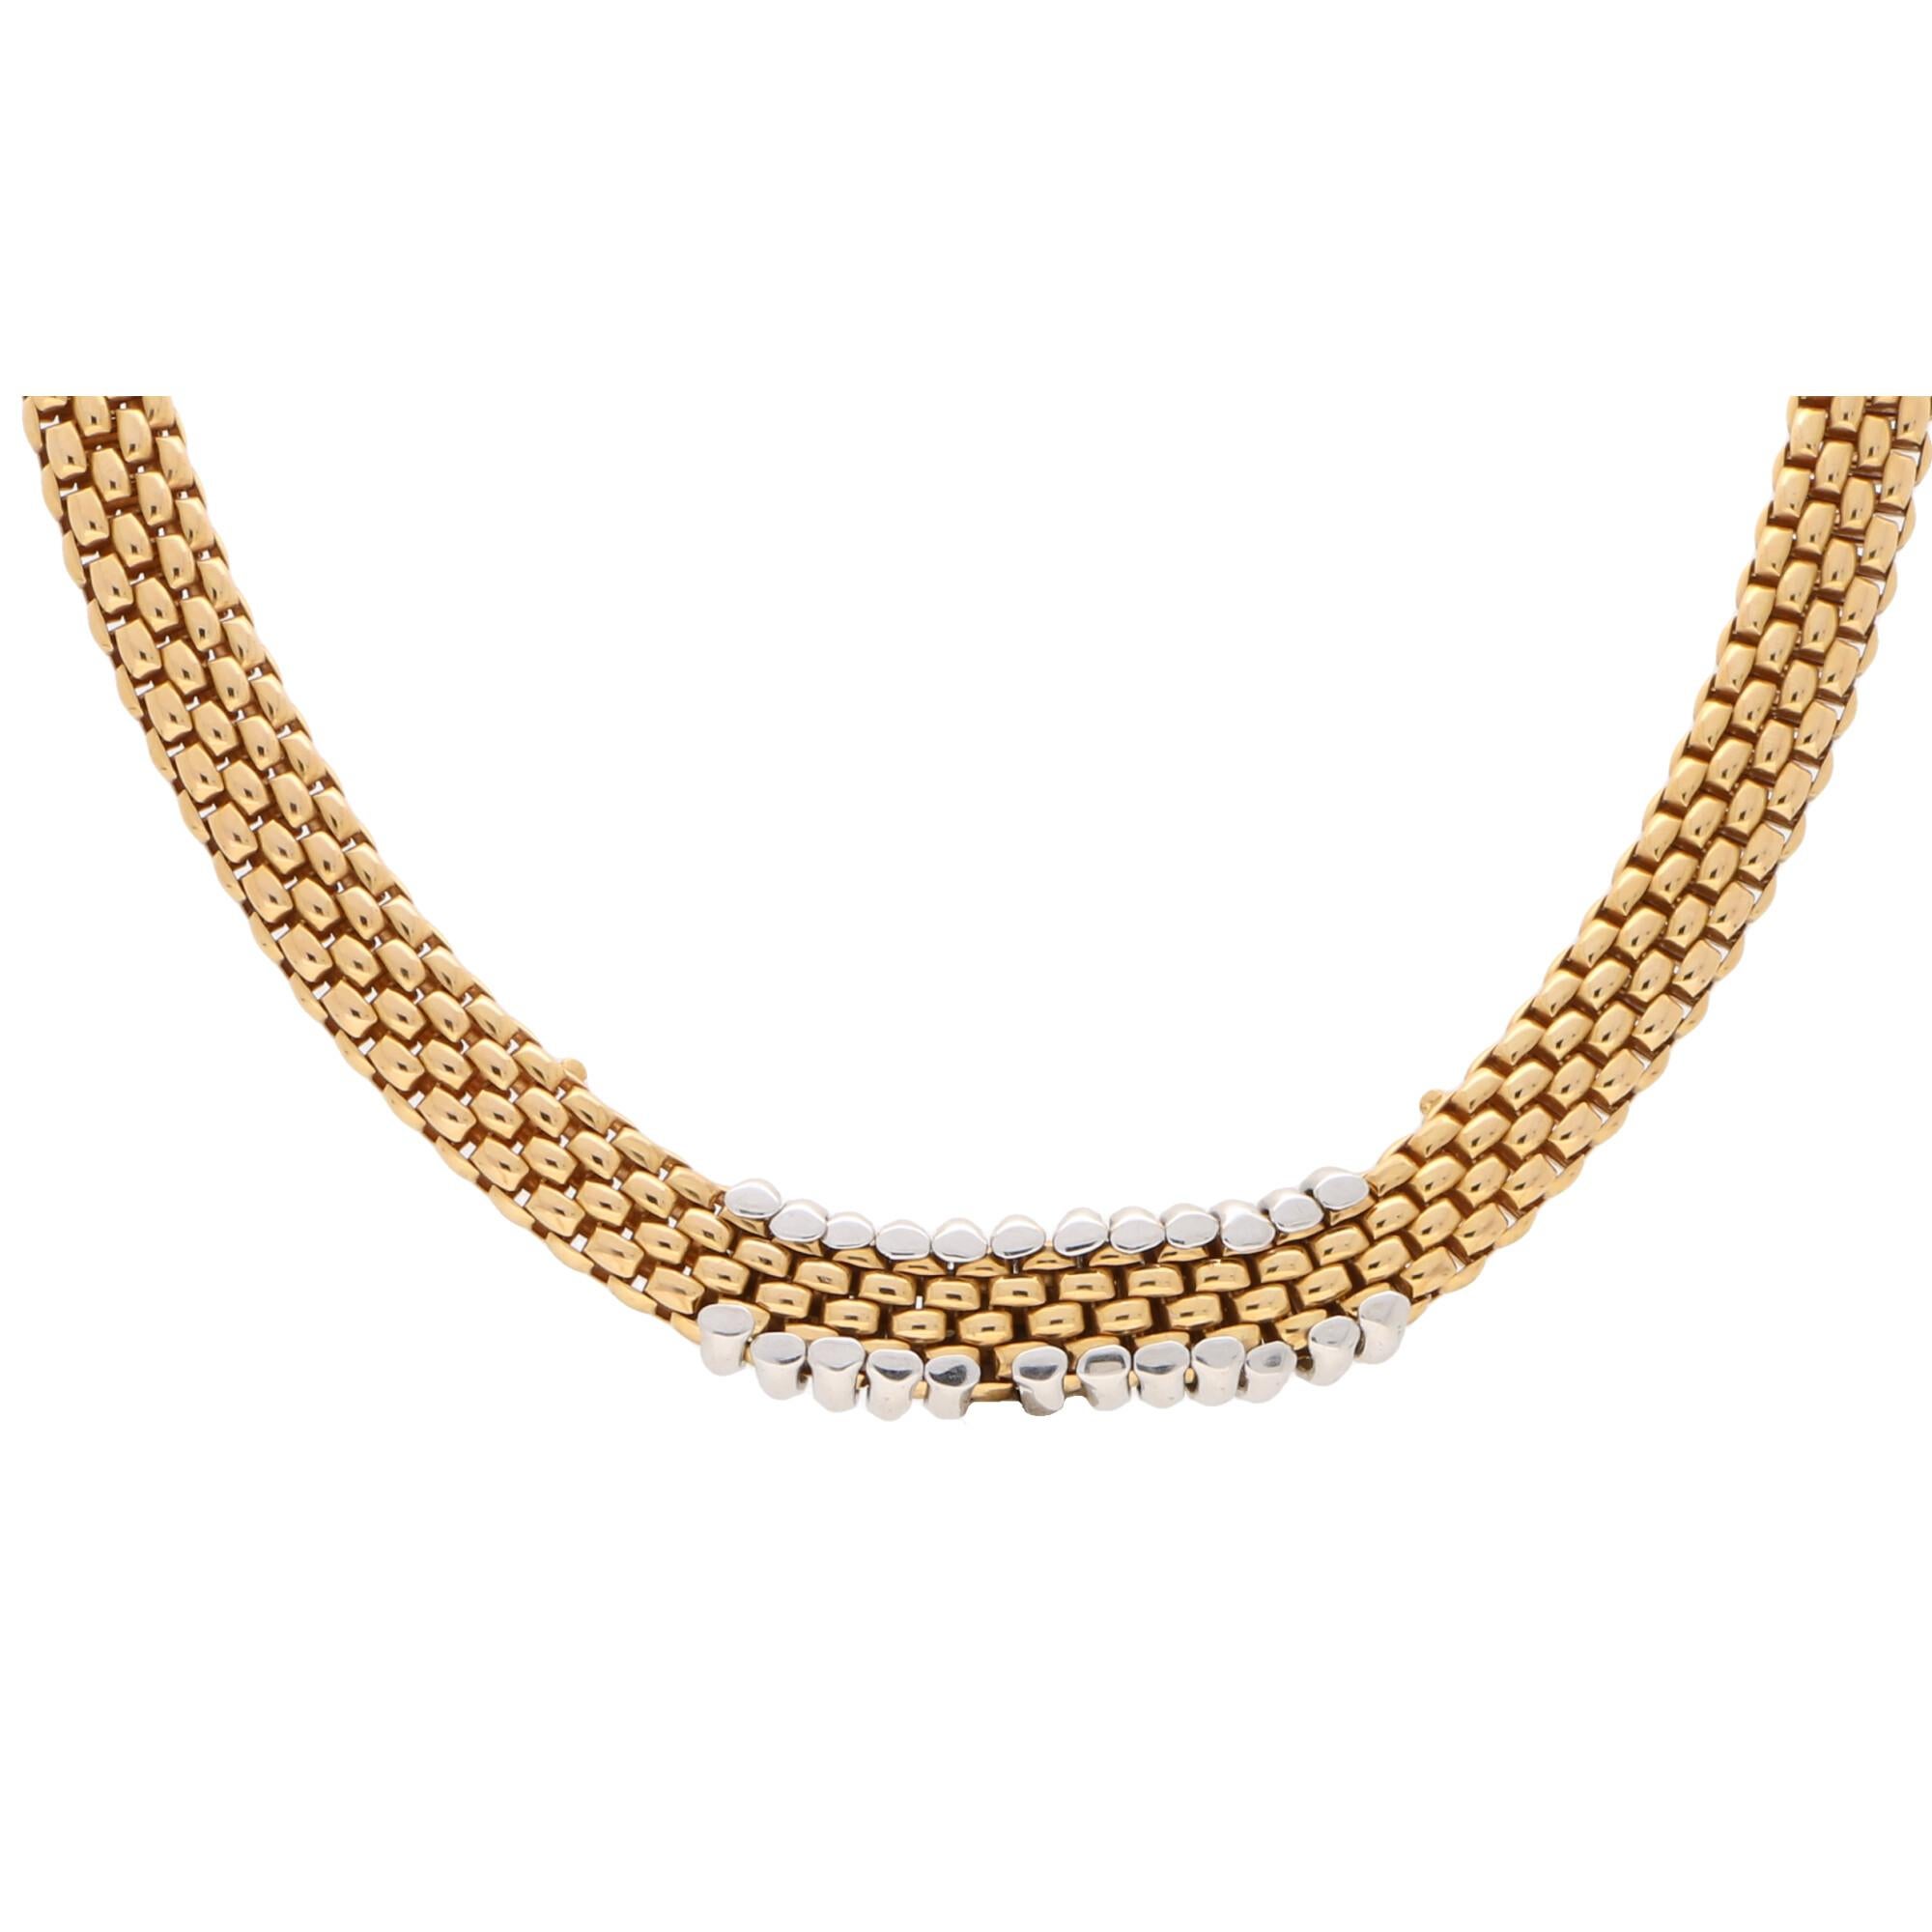 Modern Vendome Diamond Fope Necklace Set in 18 Karat Yellow and White Gold